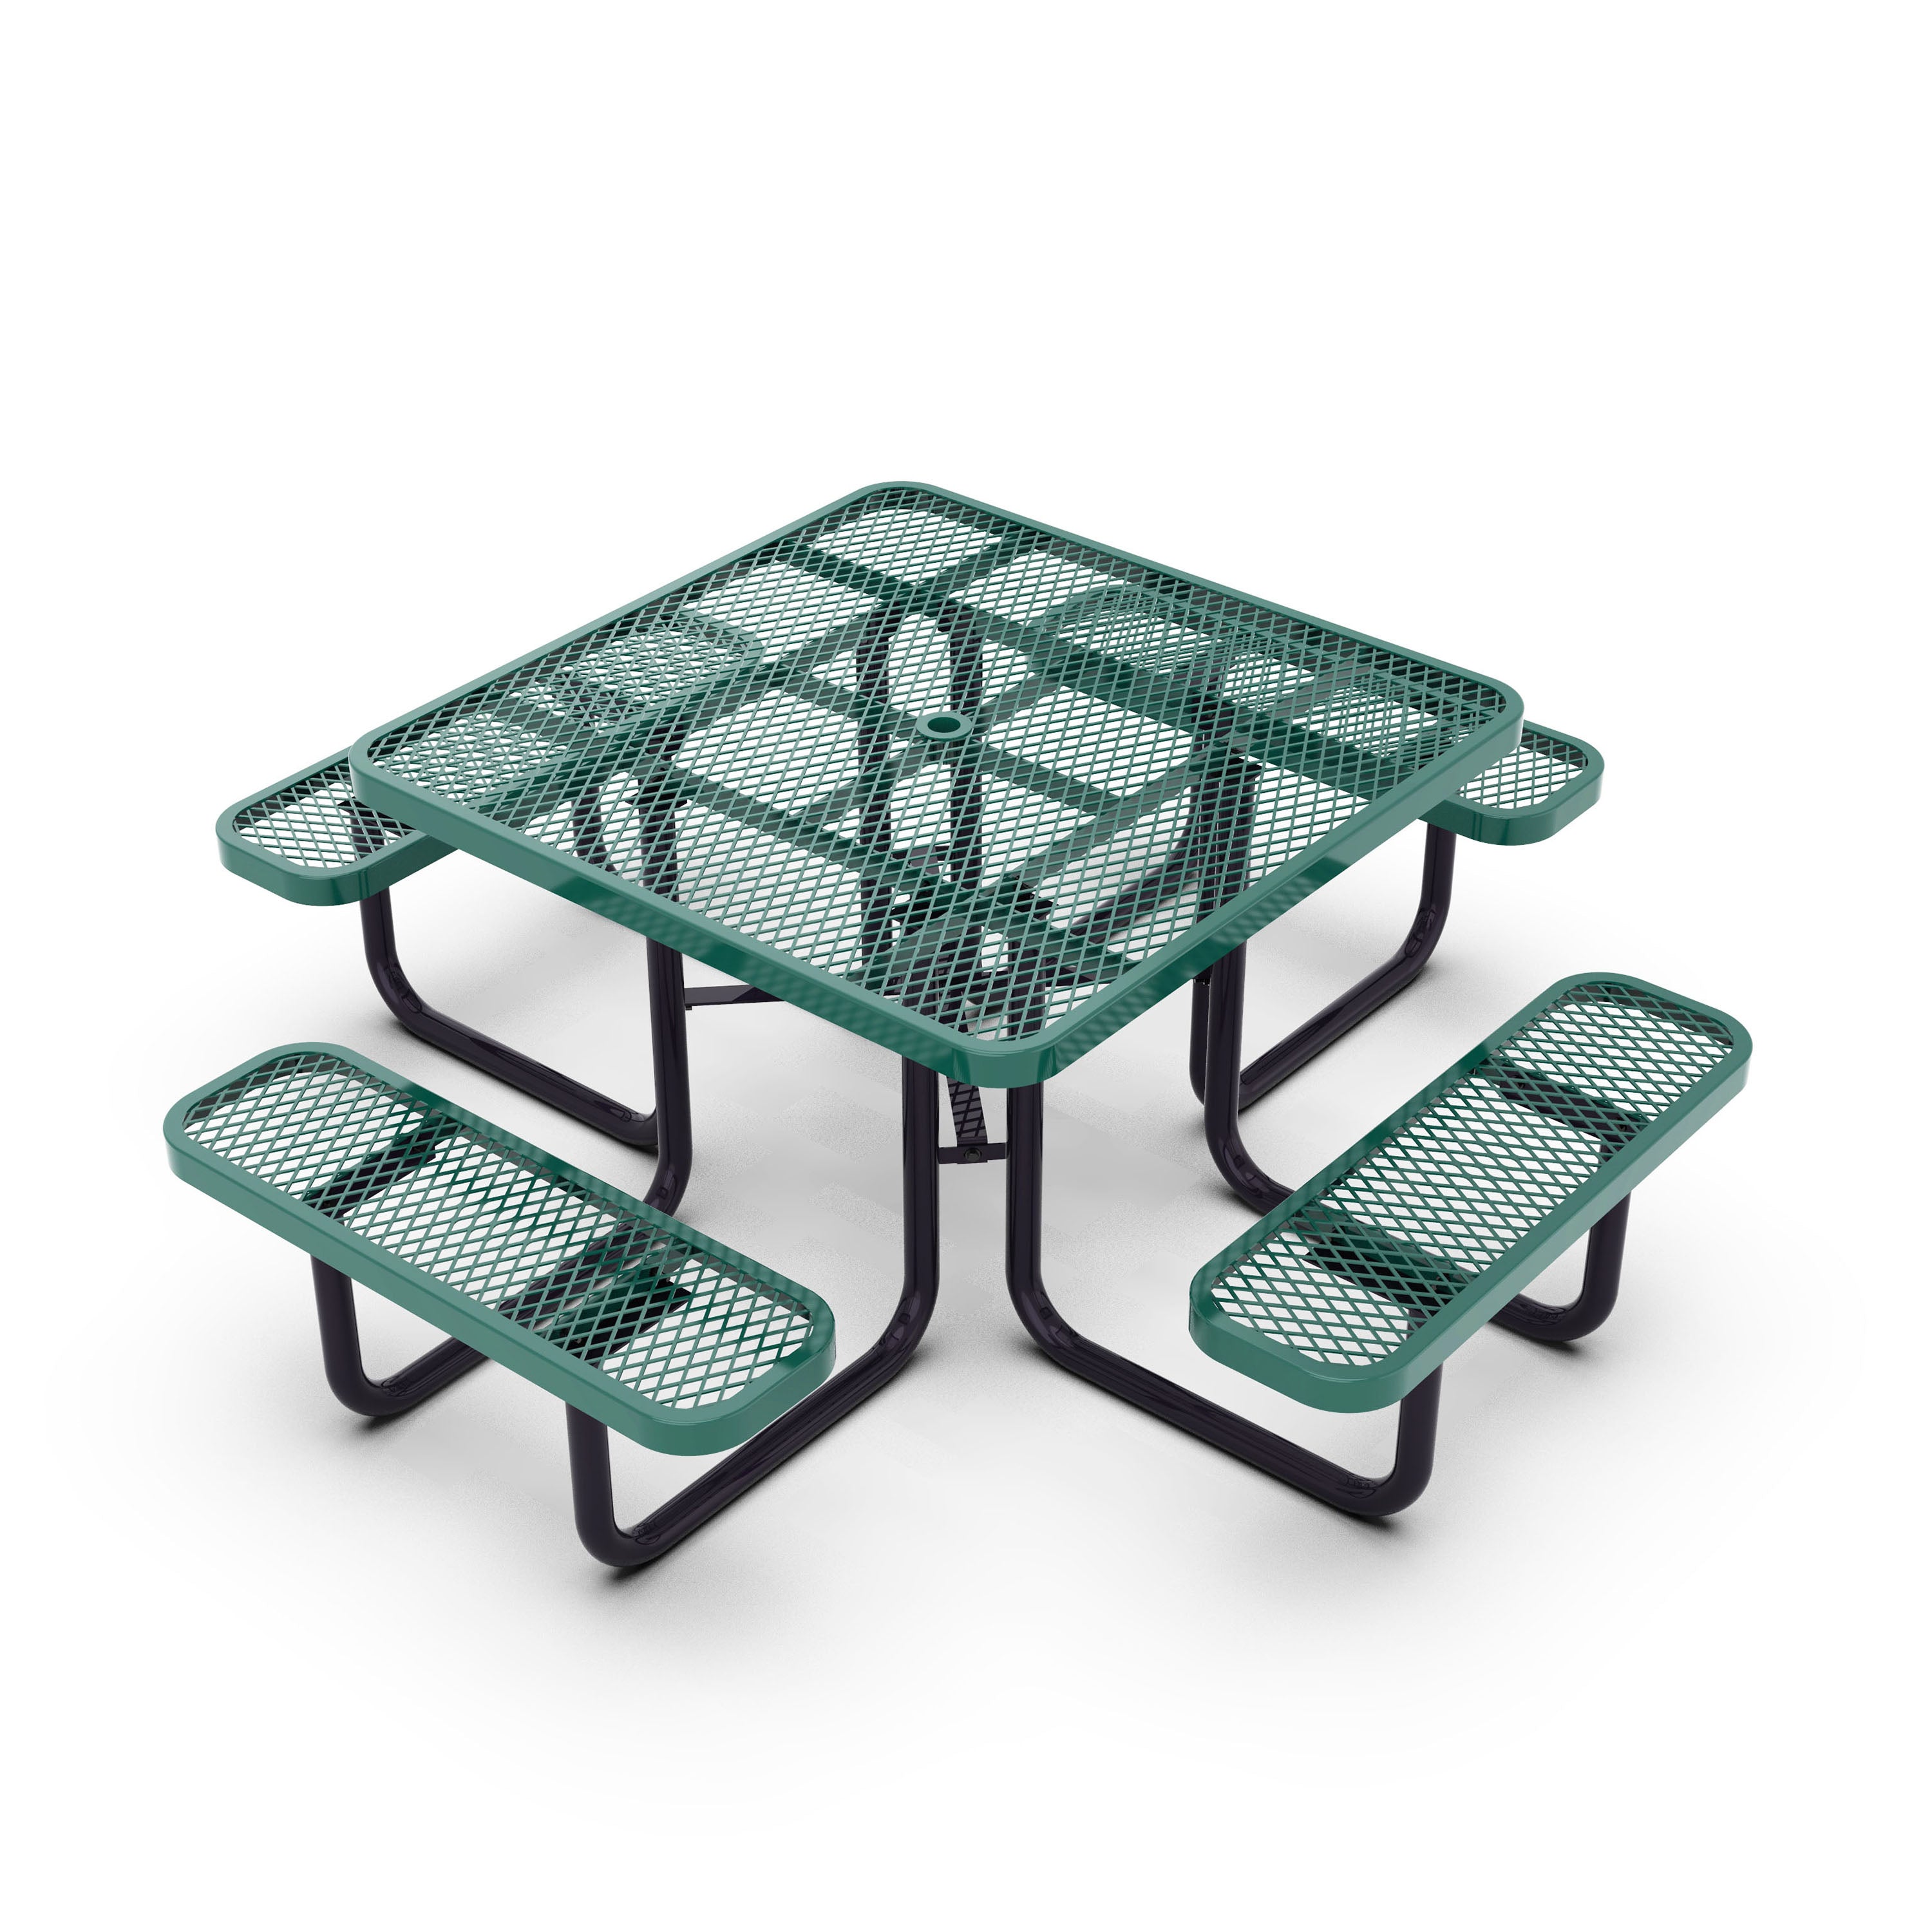 Creekside Outdoor Picnic Table with Commercial Grade Heavy Gauge Expanded Metal Mesh Top and Seats and Steel Frame-Expanded Metal Picnic Table-Flash Furniture-Wall2Wall Furnishings